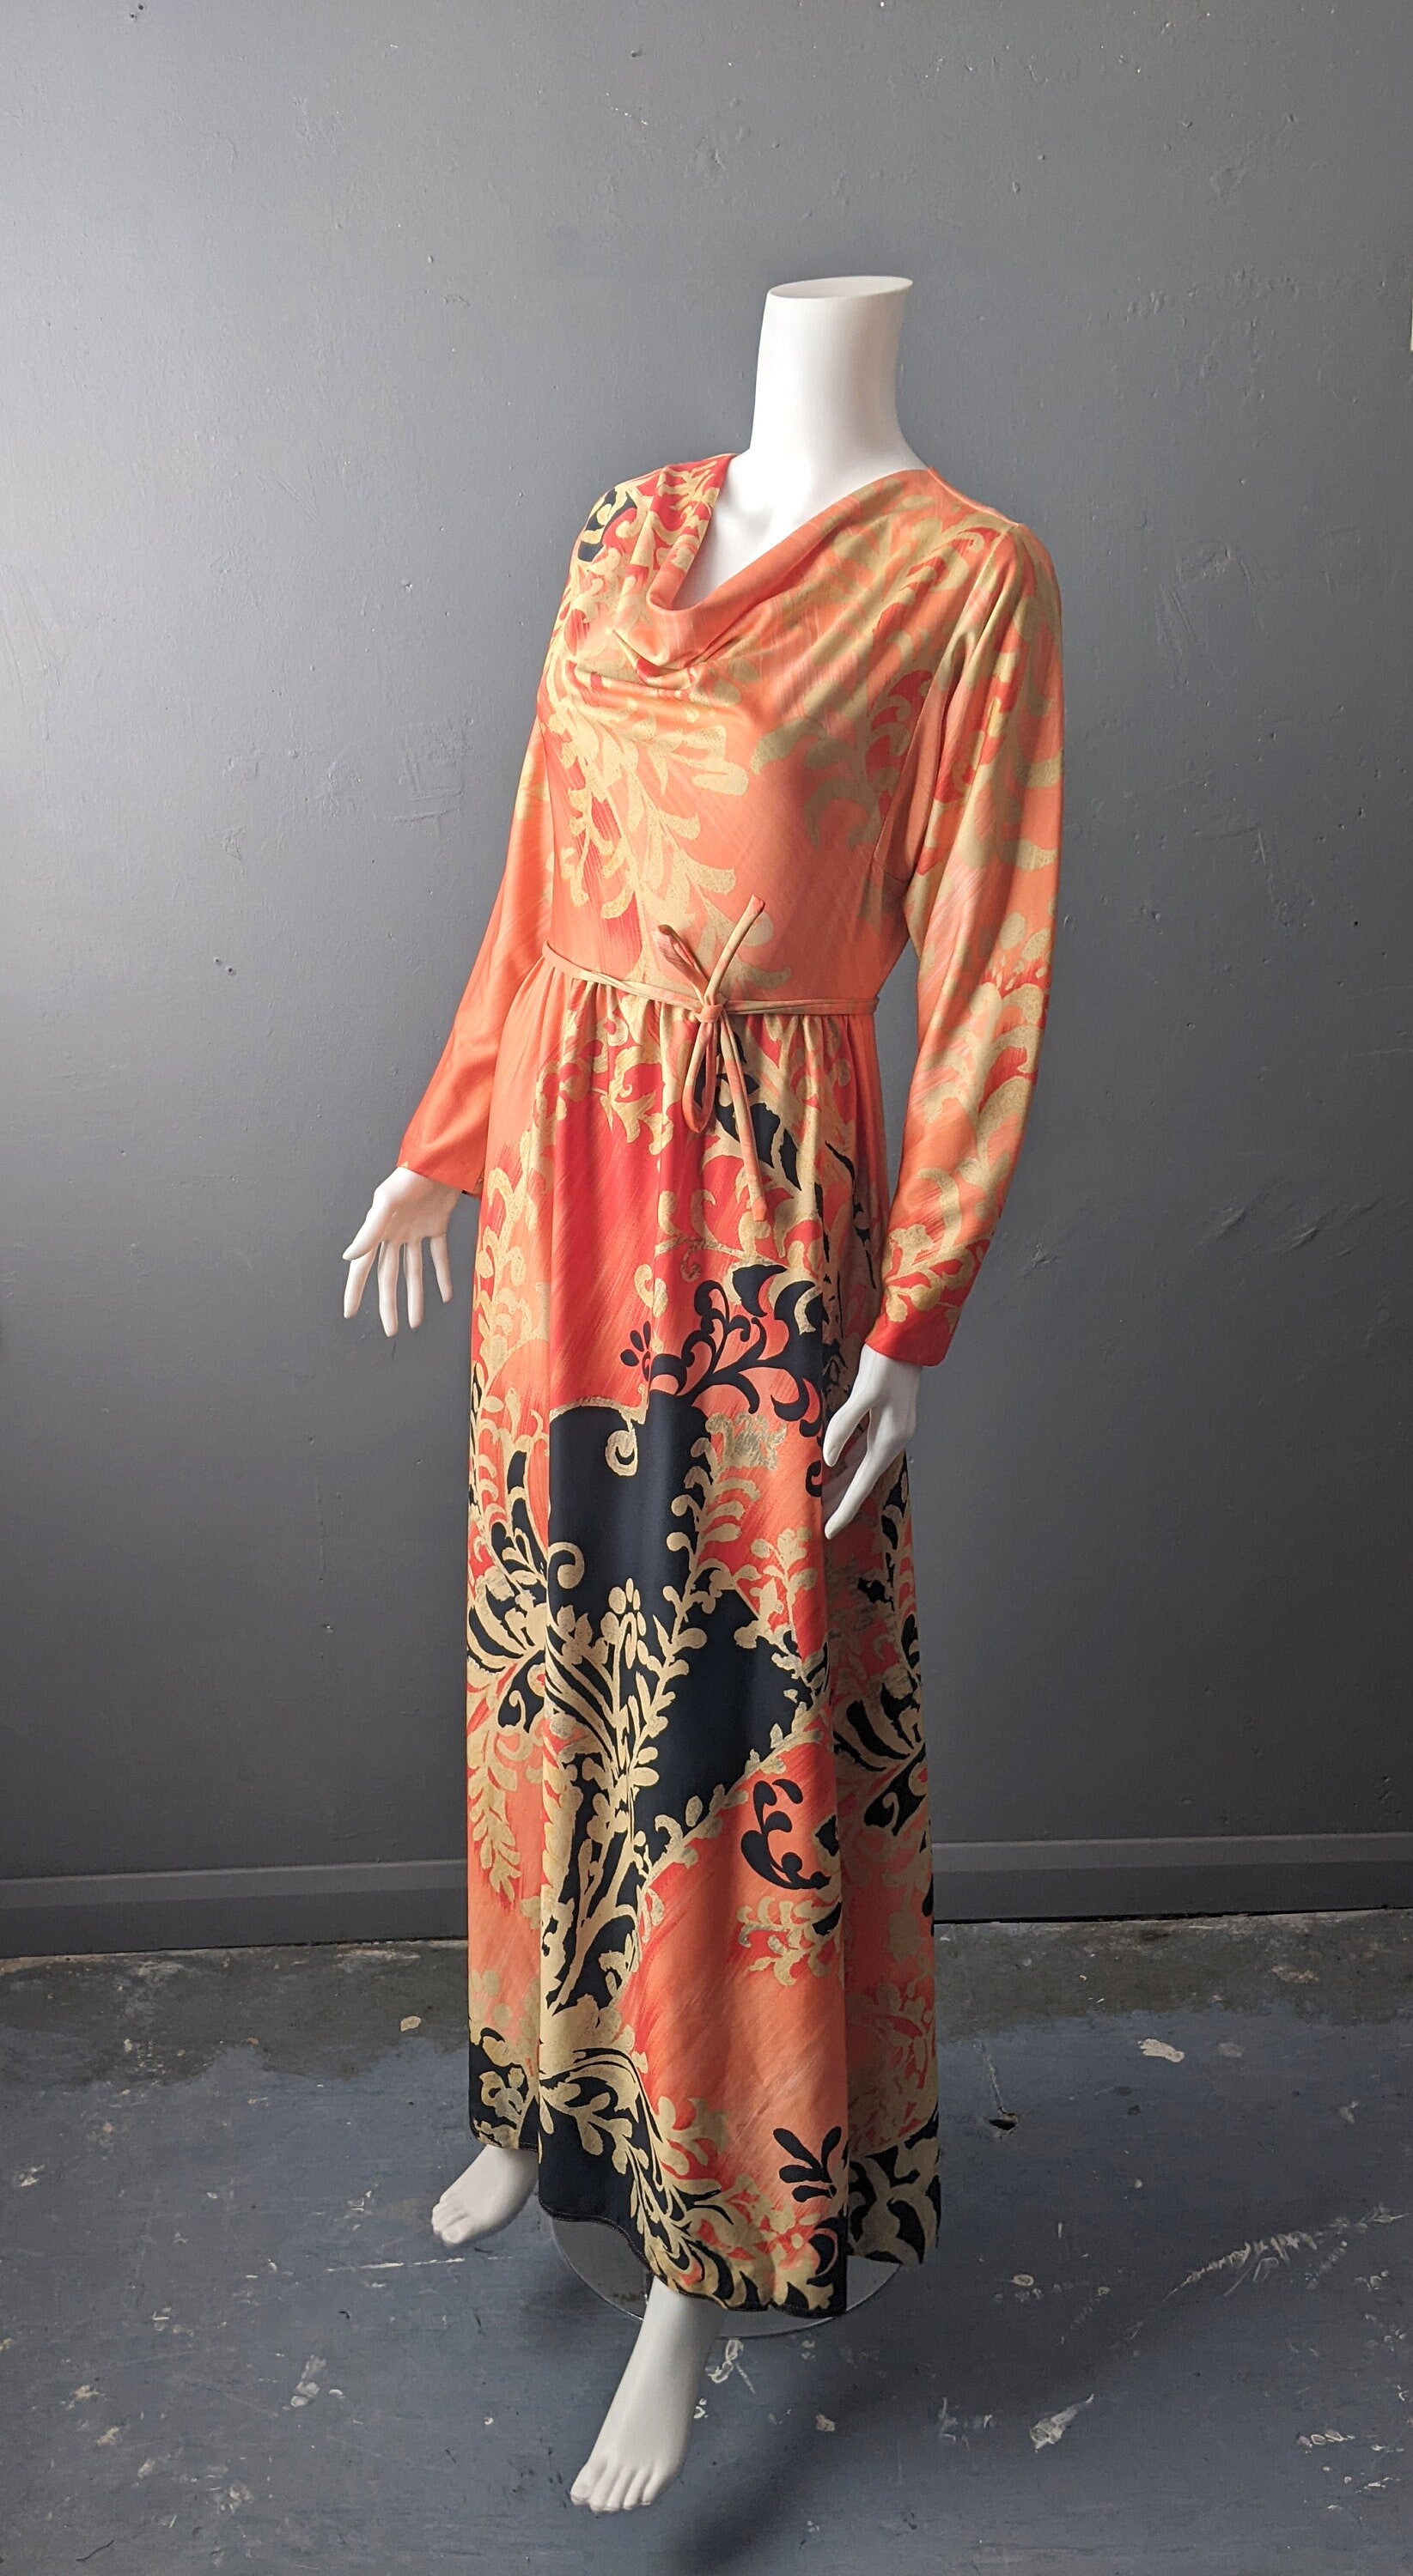 70s Cowl Neck Maxi Dress by Clive Byrne, Seventies Bohemian, Size Small Medium